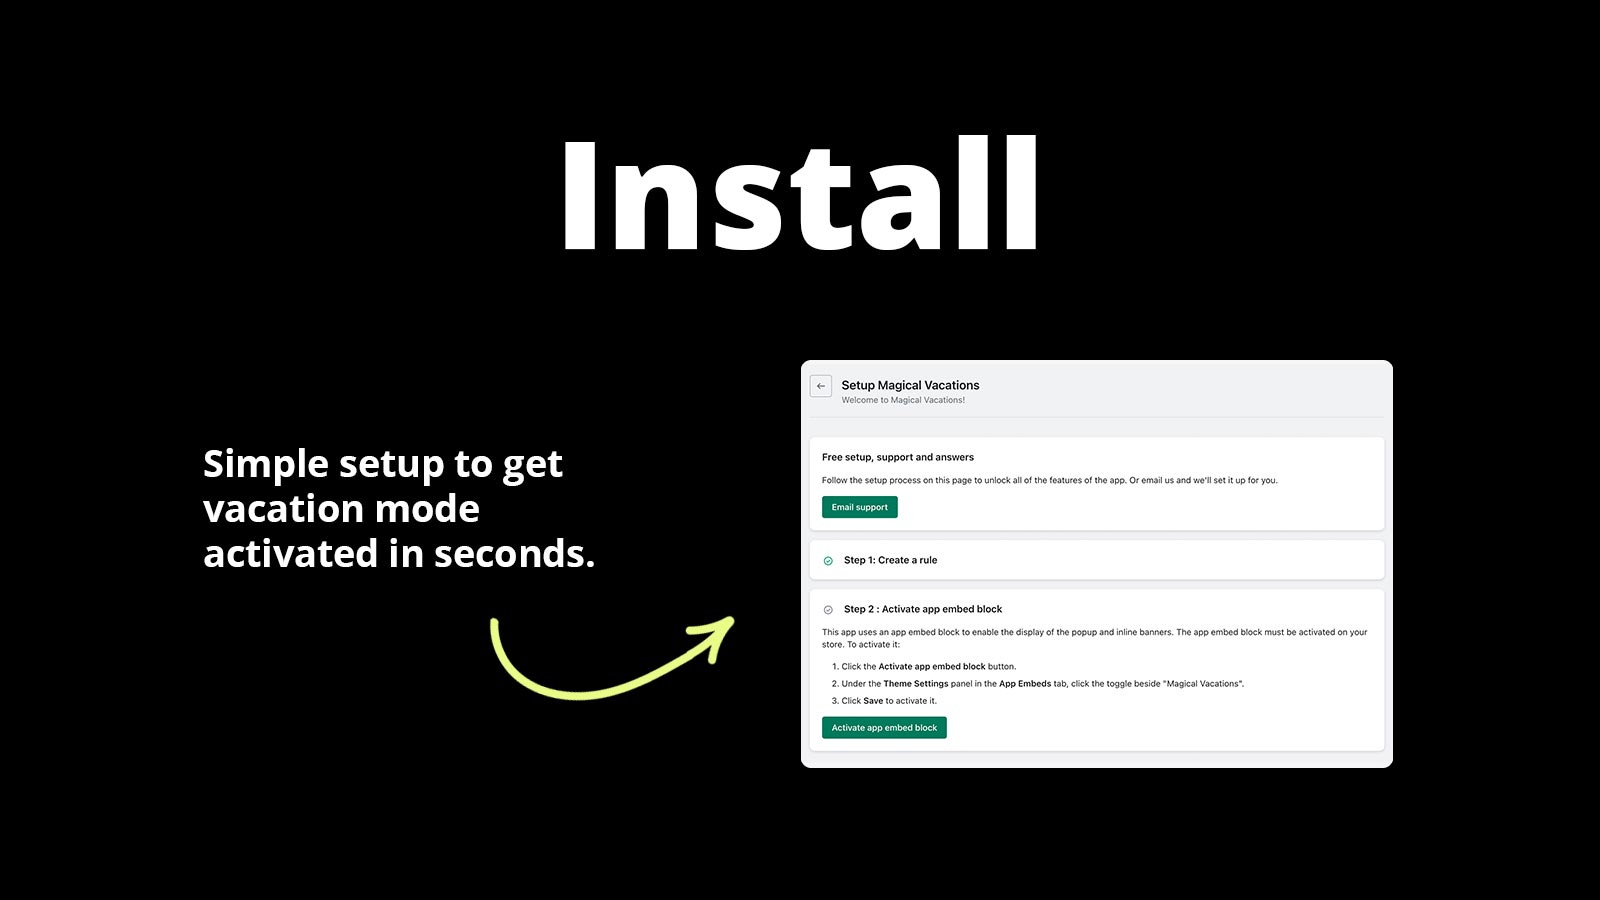 Install. Simple setup to get vacation mode activated in seconds.